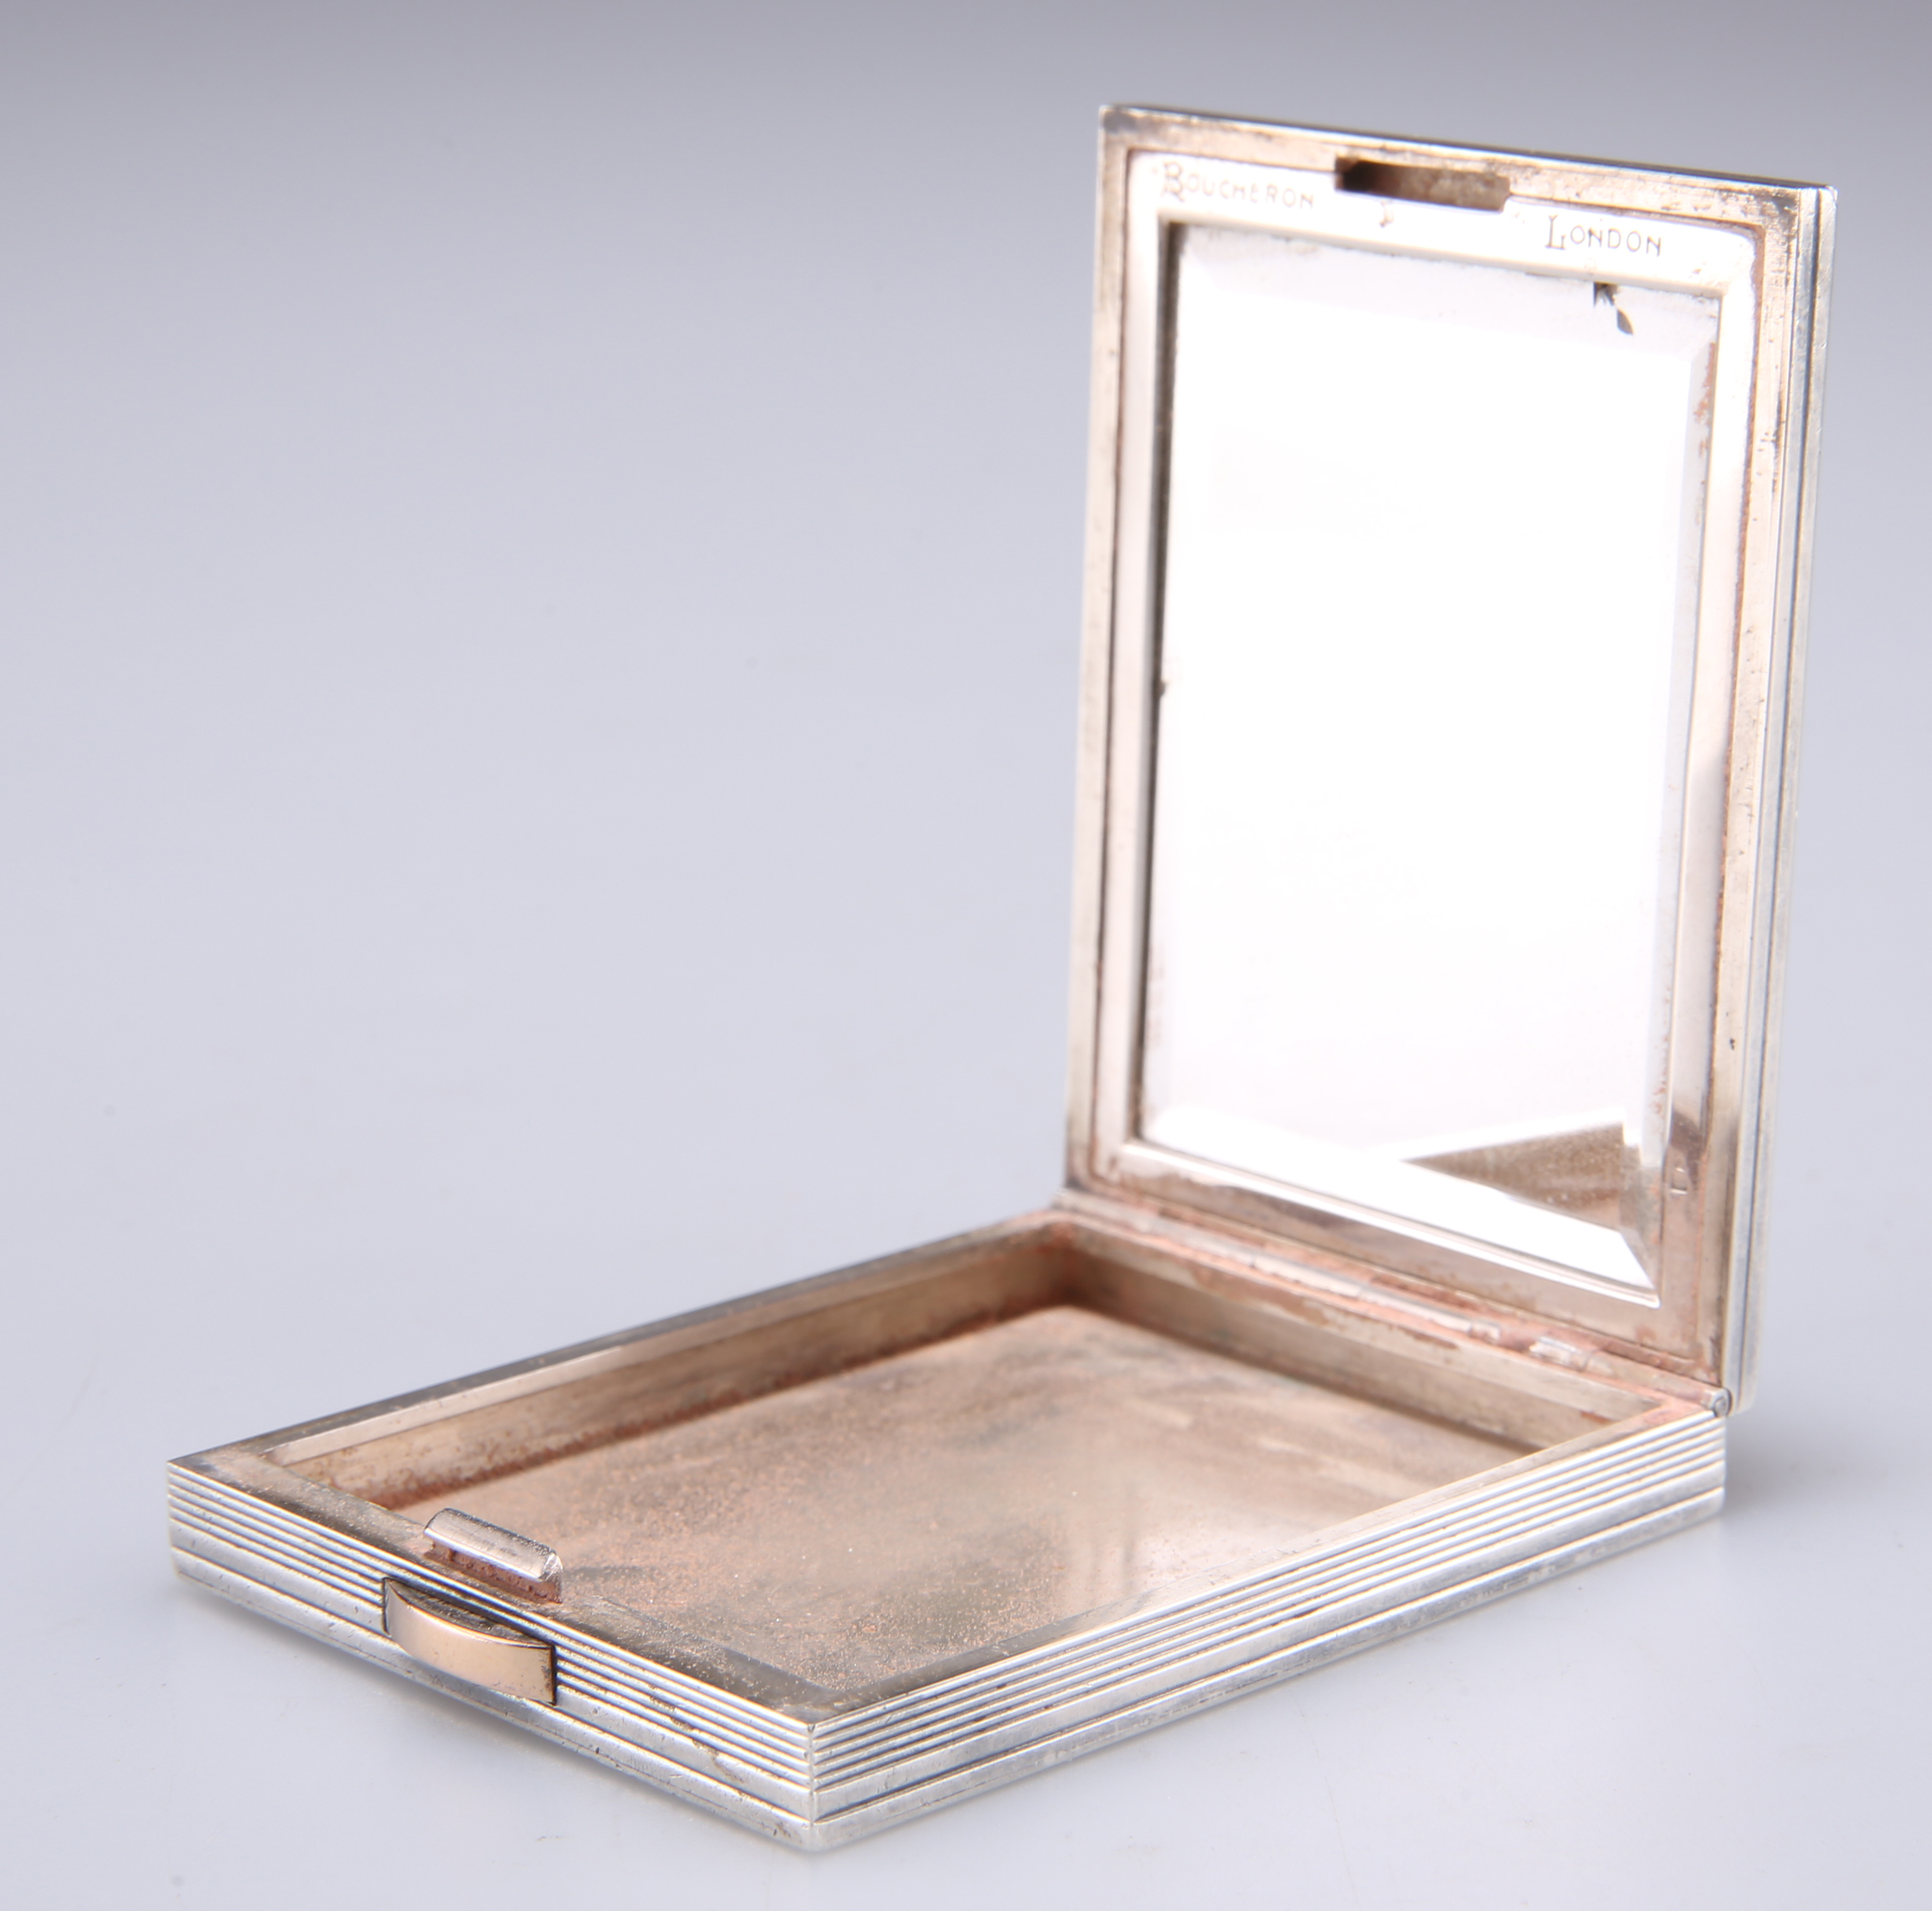 A BOUCHERON GOLD-MOUNTED SILVER COMPACT - Image 3 of 4